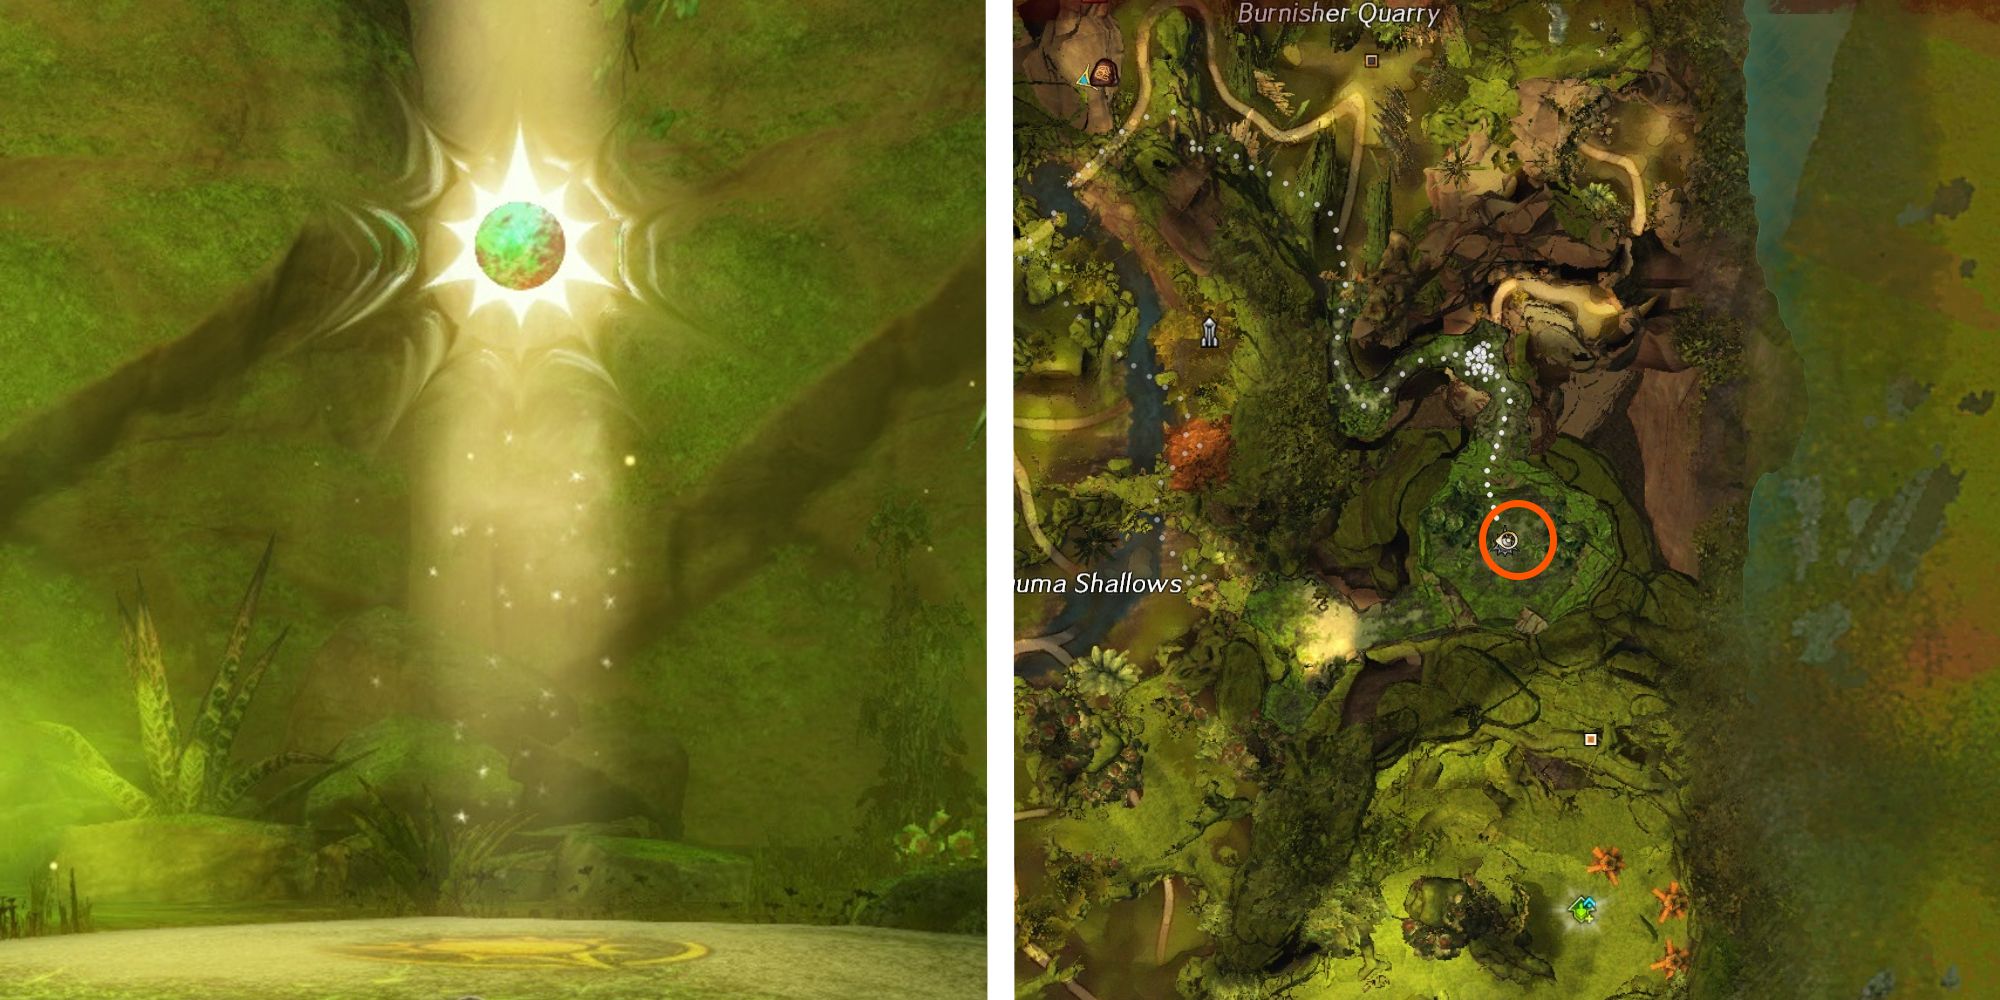 image of Burnisher Quarry Insight next to image of location on map